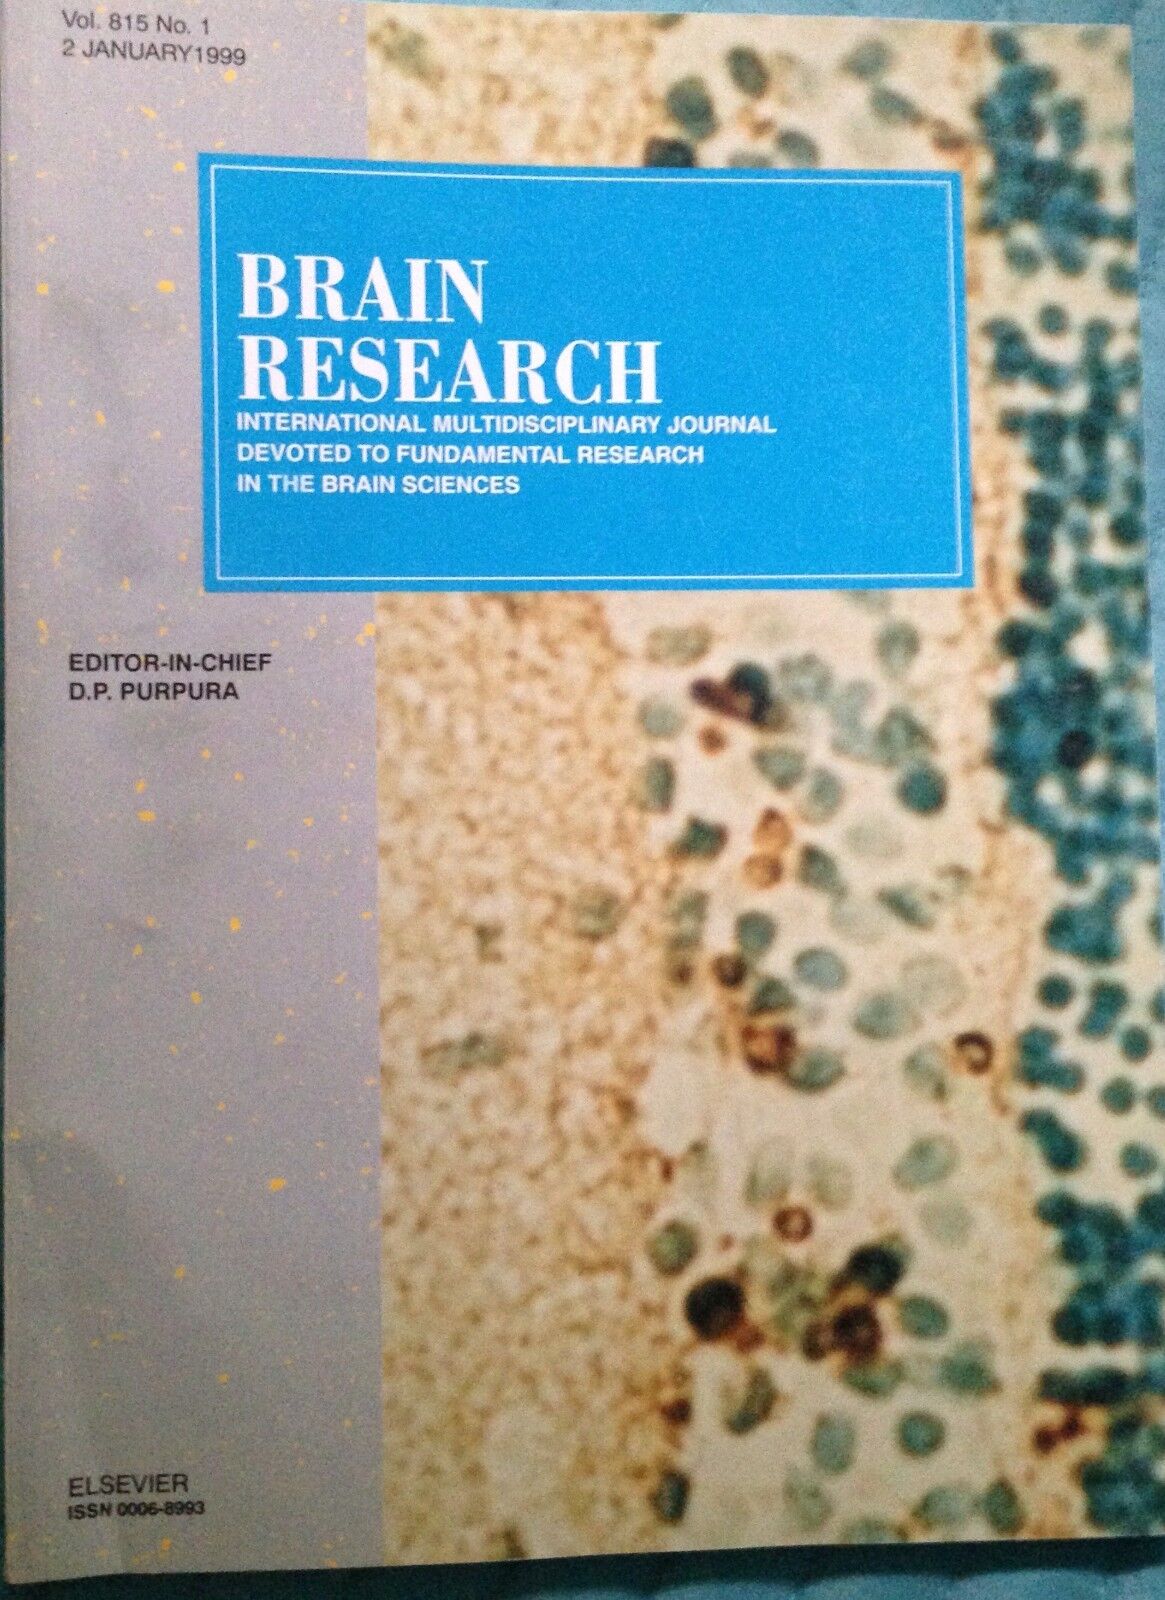   Brain research - AA.VV - Elsevier - 1999 - MP